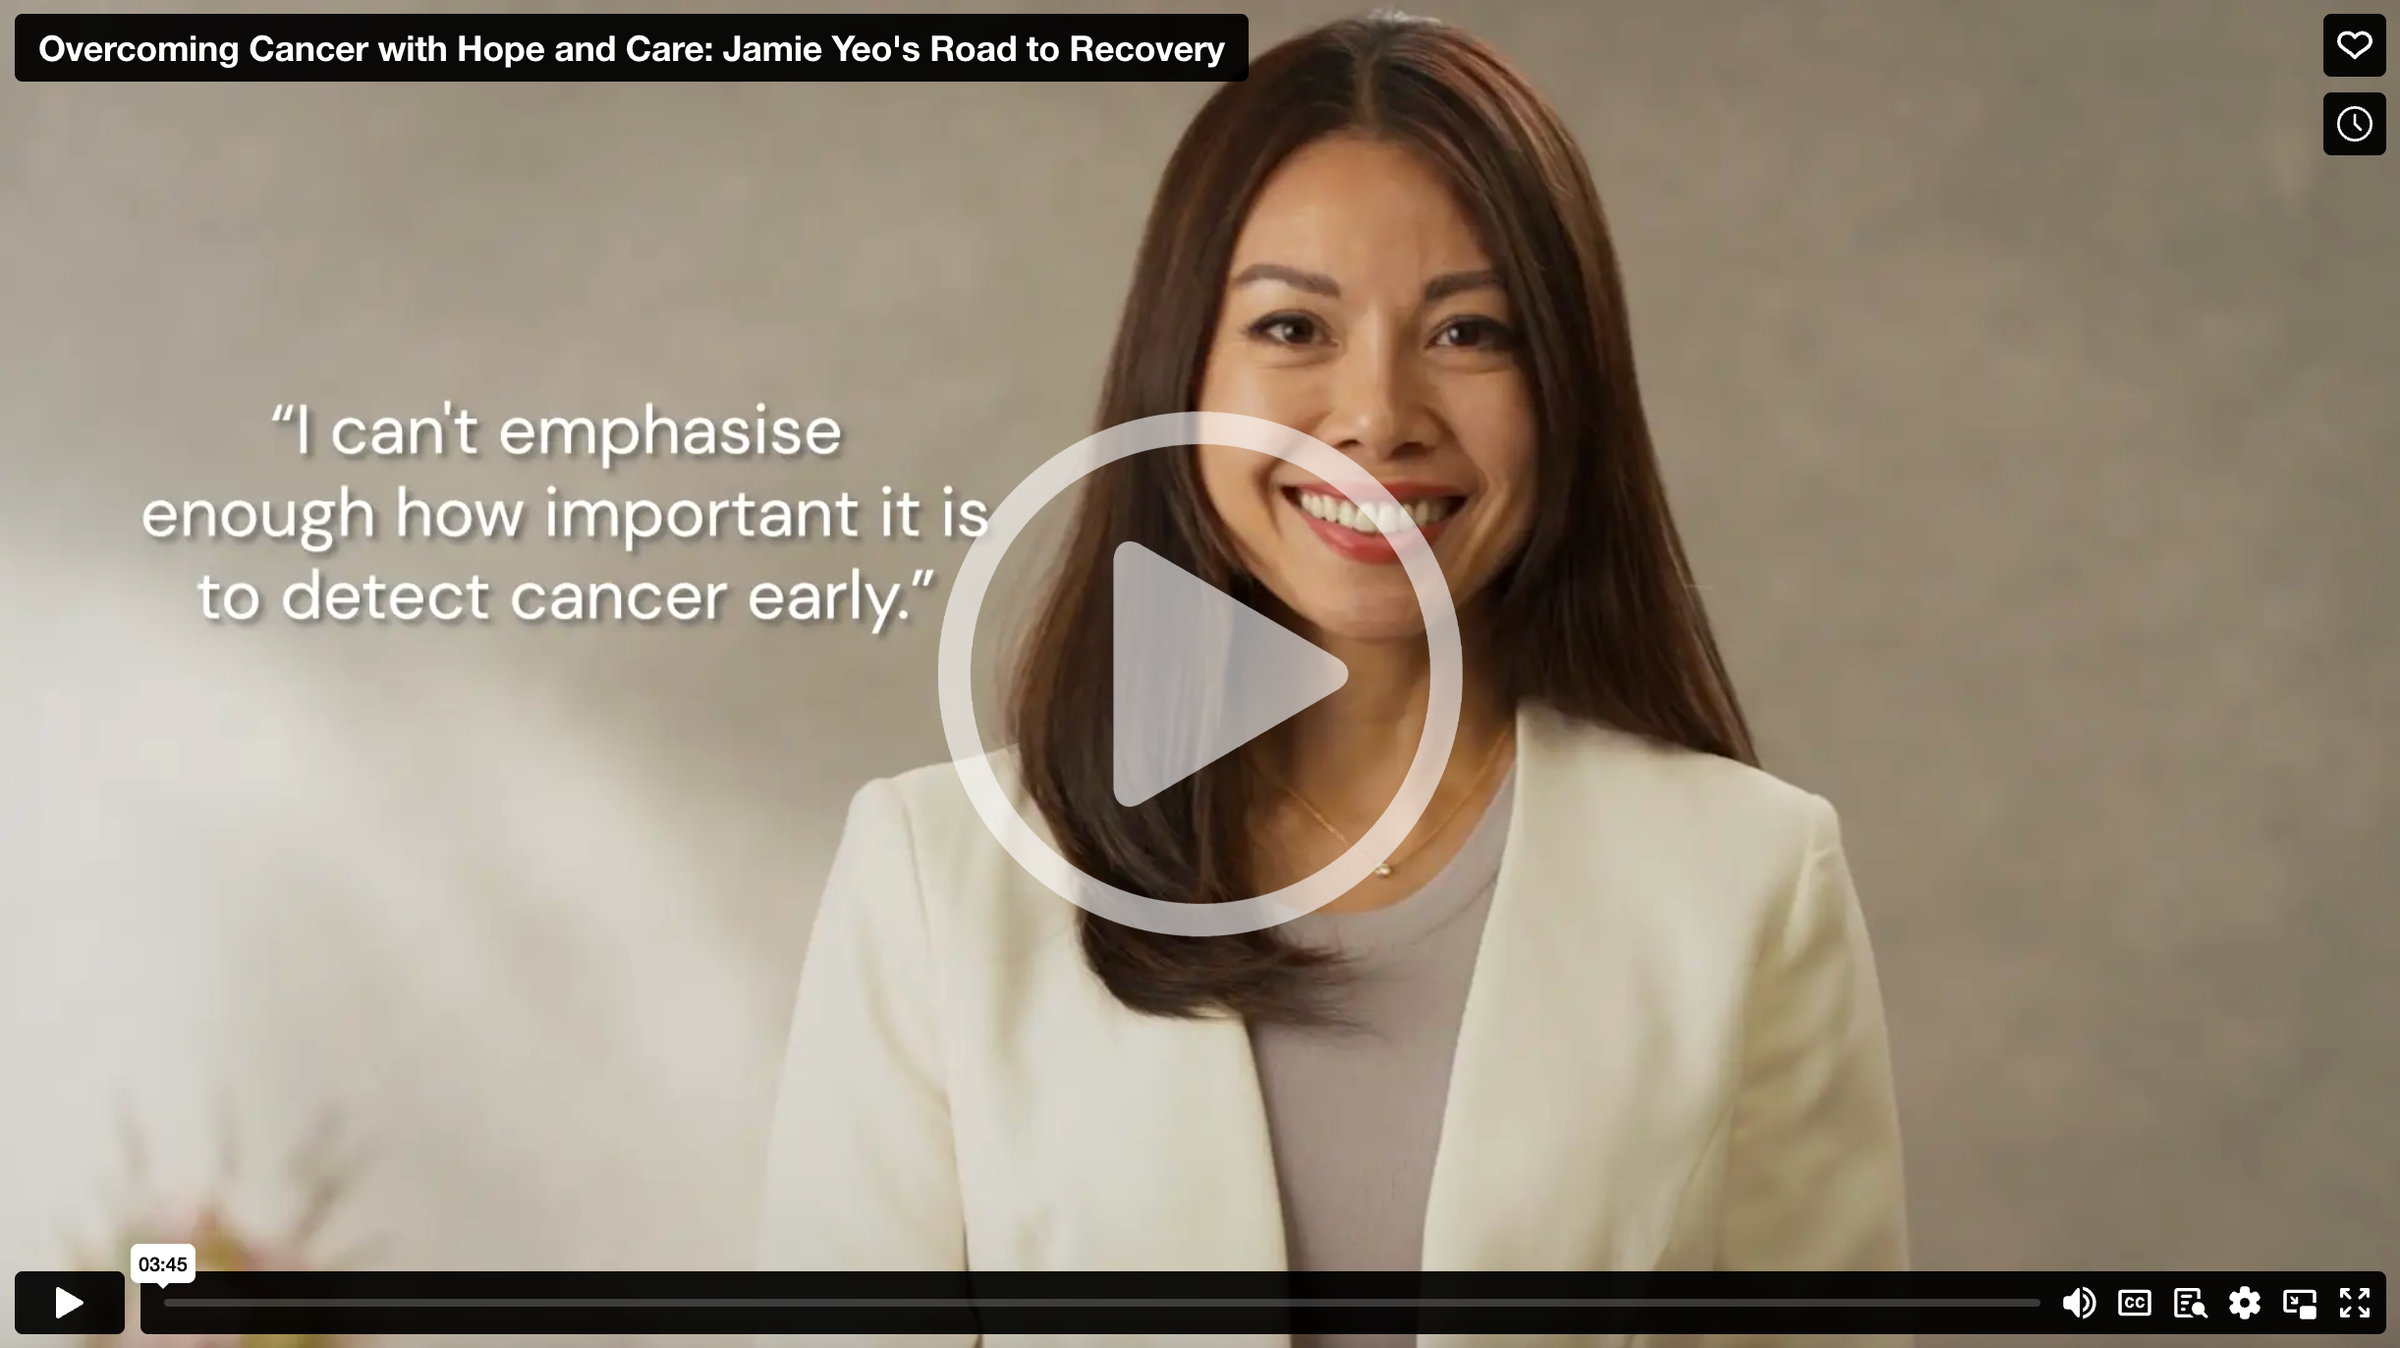 Overcoming cancer with hope and care